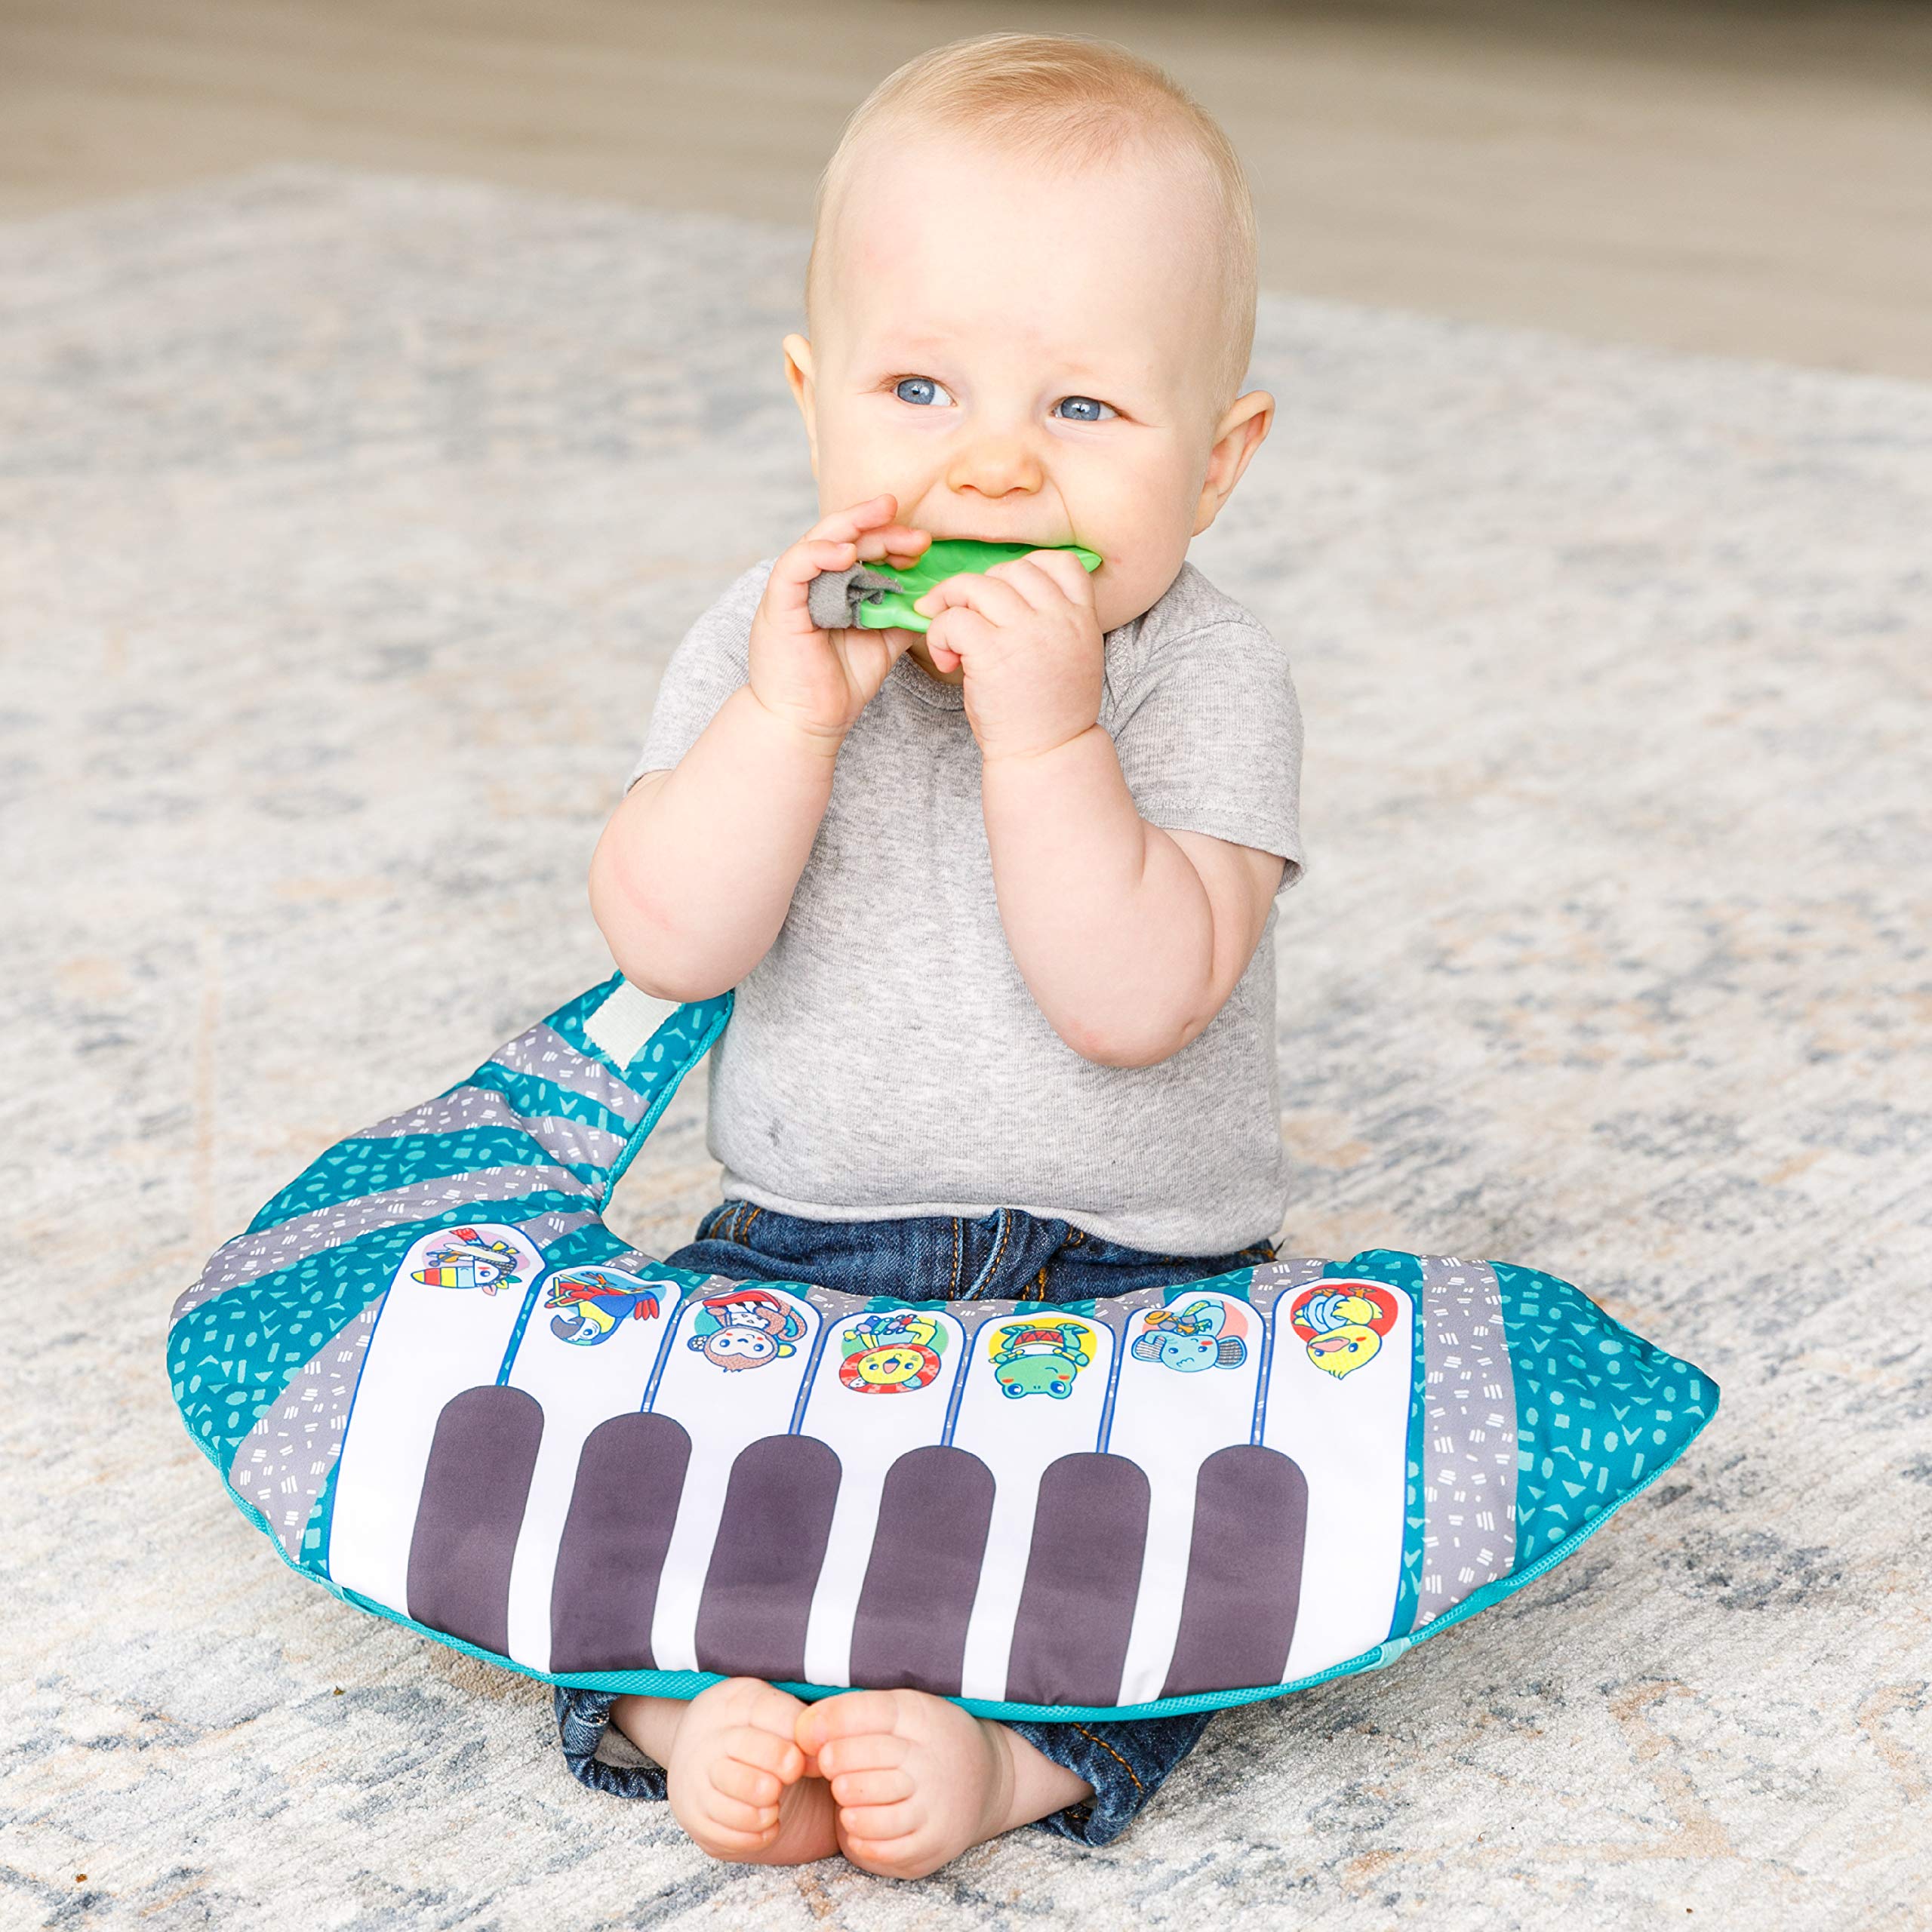 Infantino Grow with Me 3-in-1 Tummy Time Piano - 35 Sensory Stimulating Sounds, 3 Ways to Play, Tiny to Toddler, Attaches to Cribs, Tummy-Time